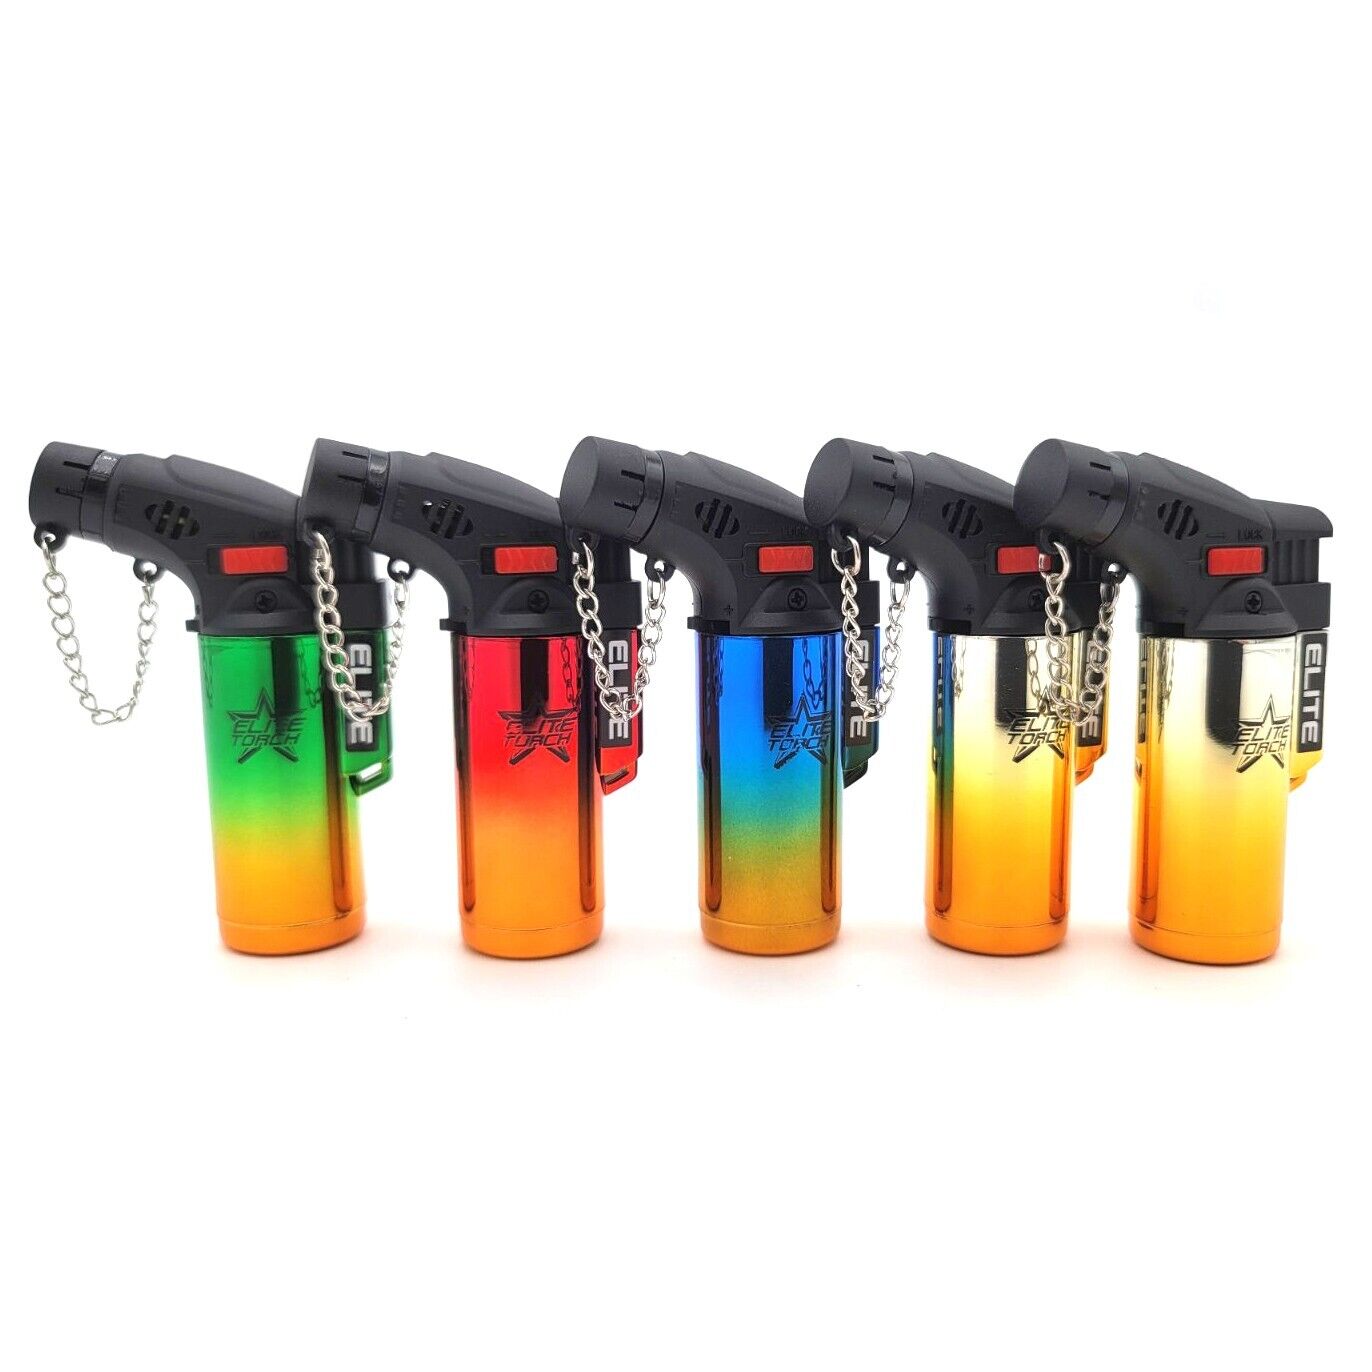 Elite Brands USA Mini Mirror Butane Gas Refillable Torch Lighters Pack of 10